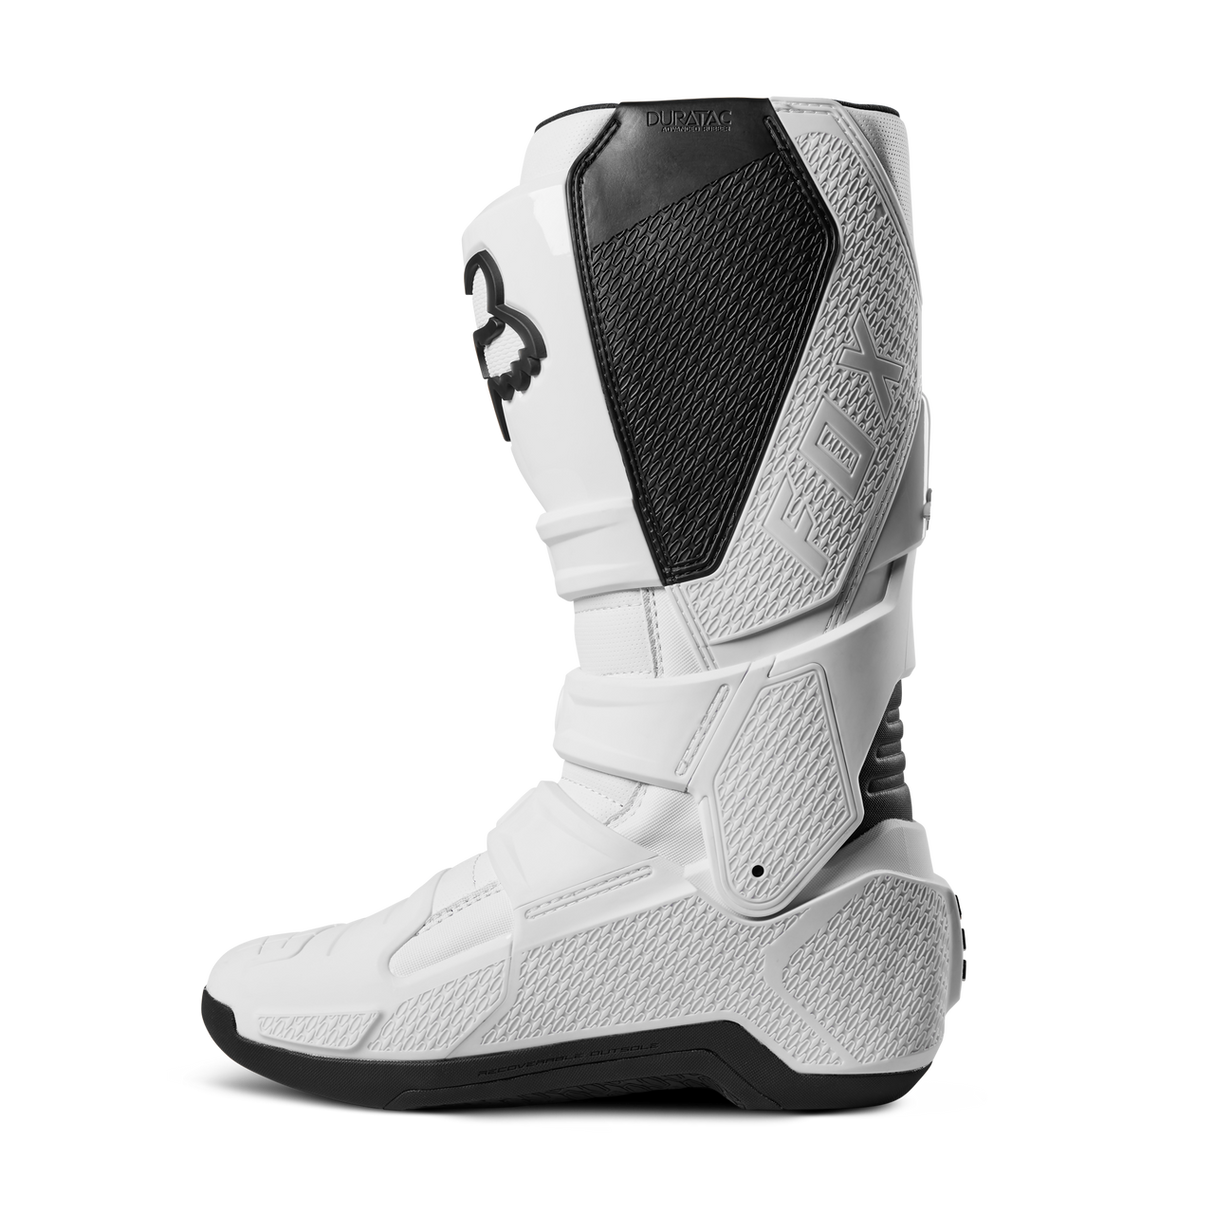 Fox Motion Boots White